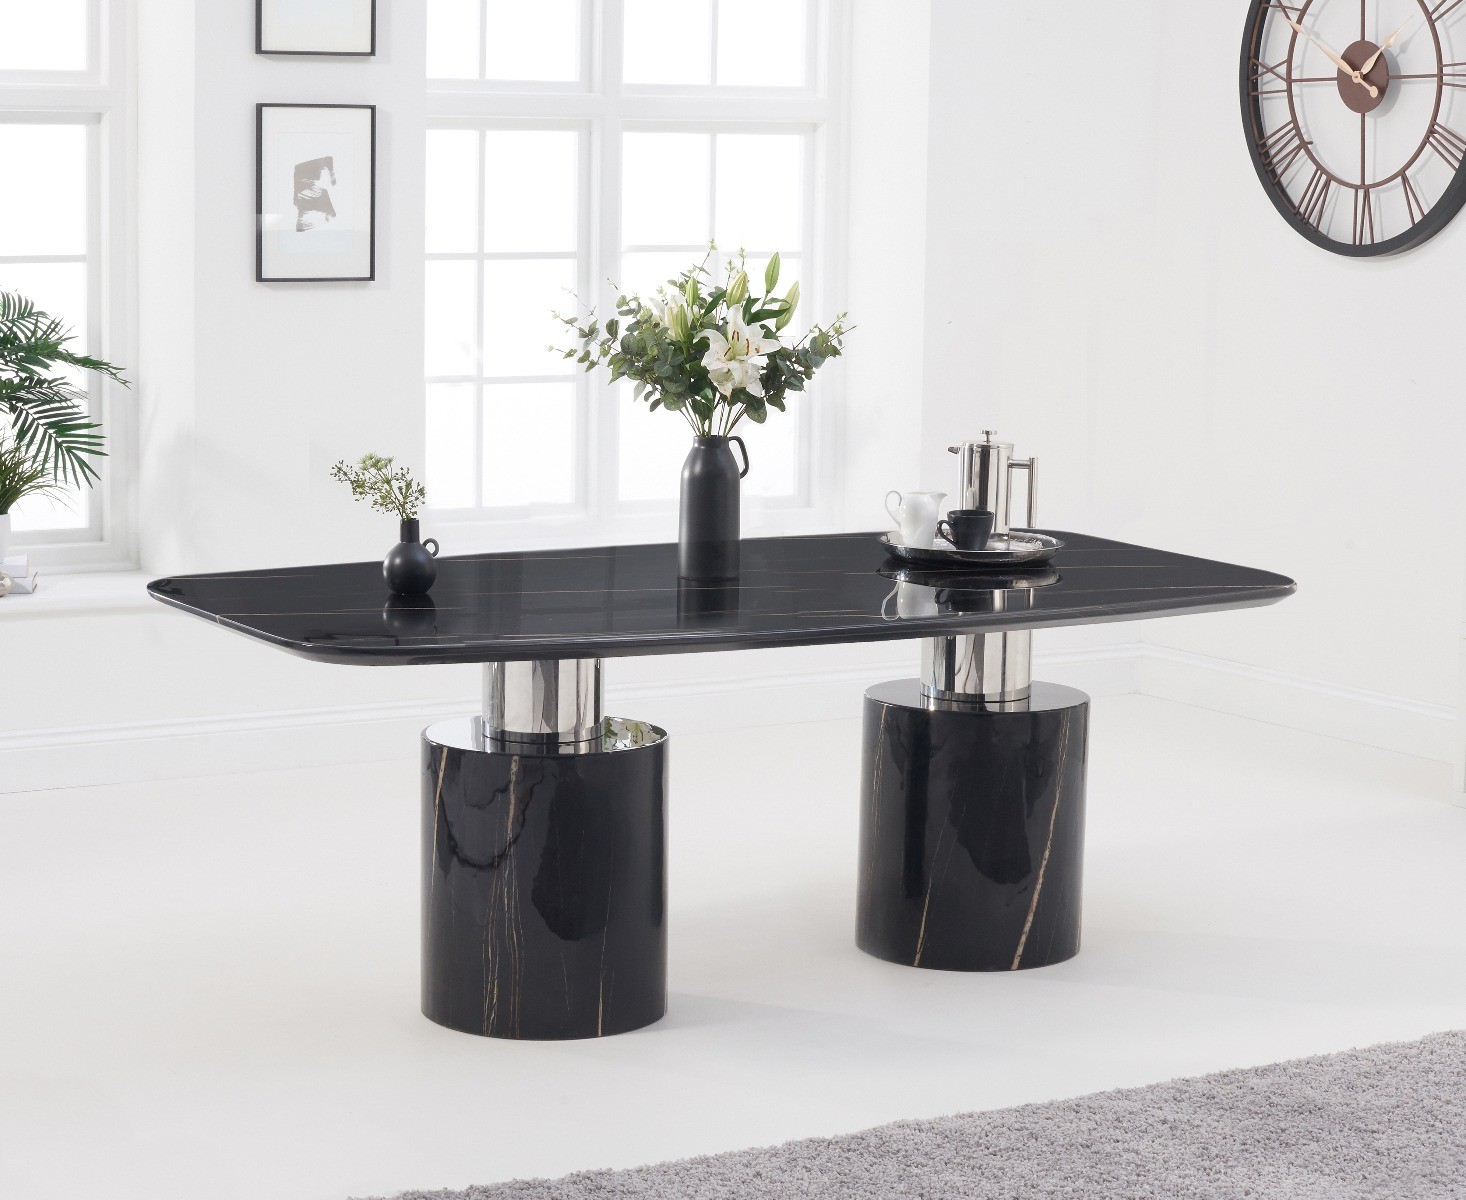 Photo 3 of Antonio 180cm black marble dining table with 6 grey francesca chairs